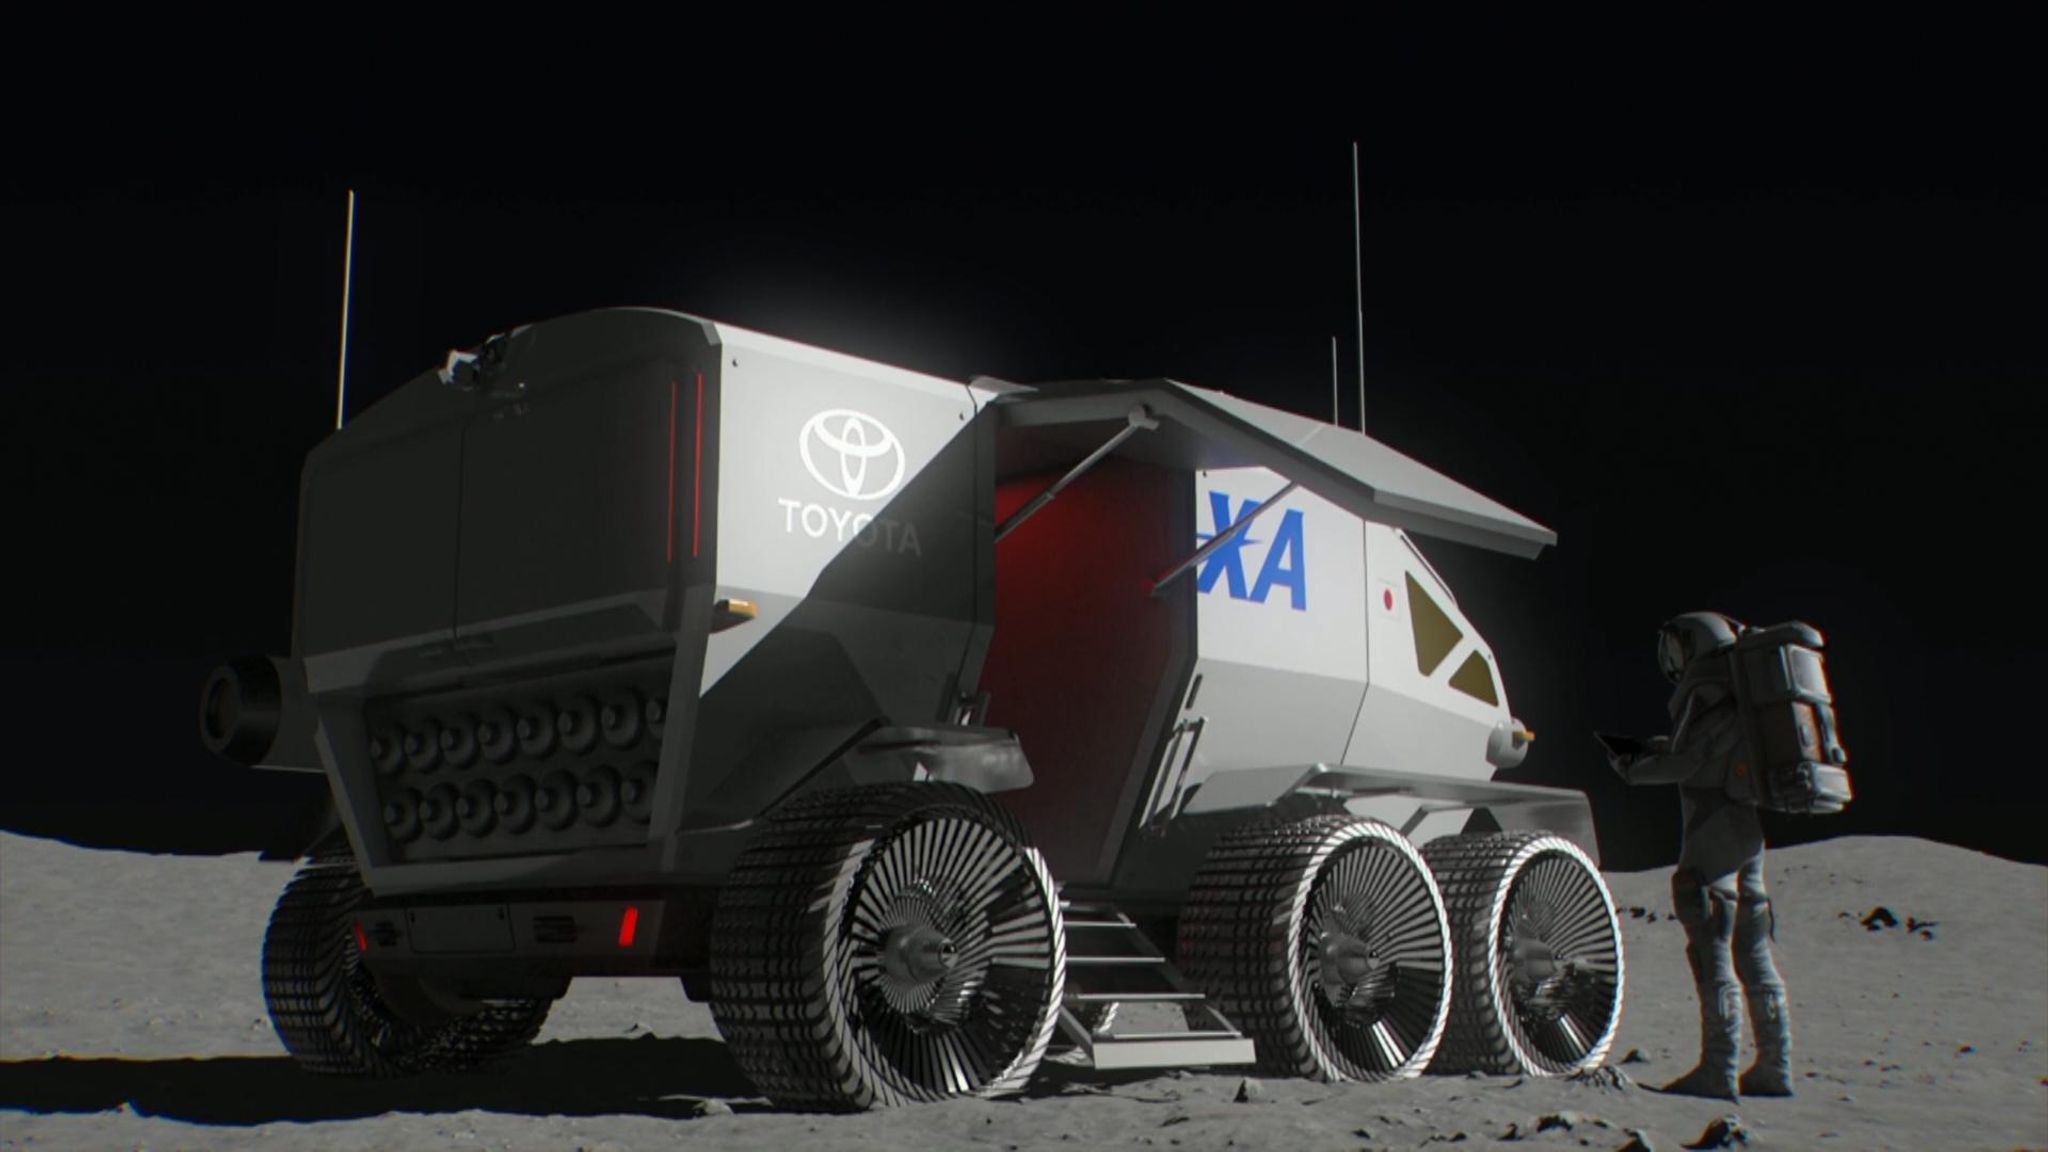 Toyota reveals lunar rover for Japanese moon mission Science & Tech